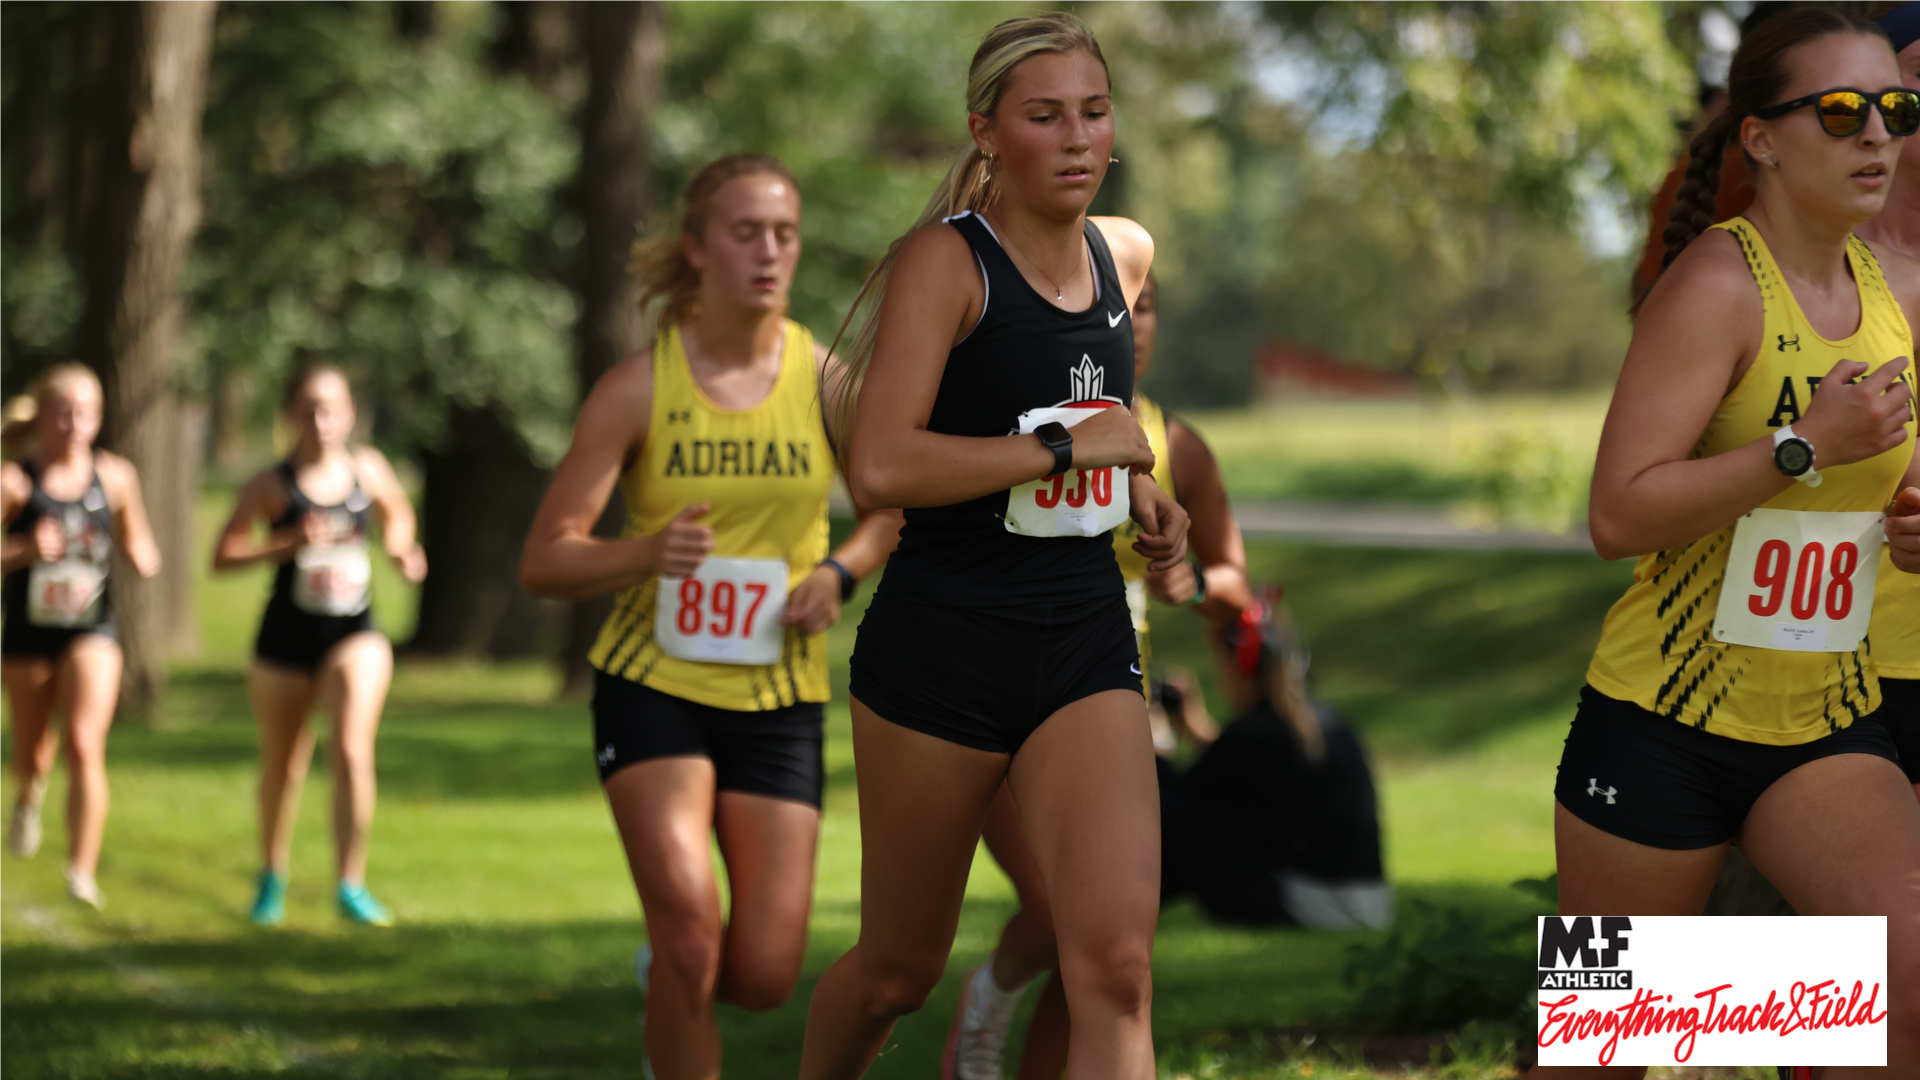 Women's Cross Country competes a the Bethel Invitational and sets multiple personal records